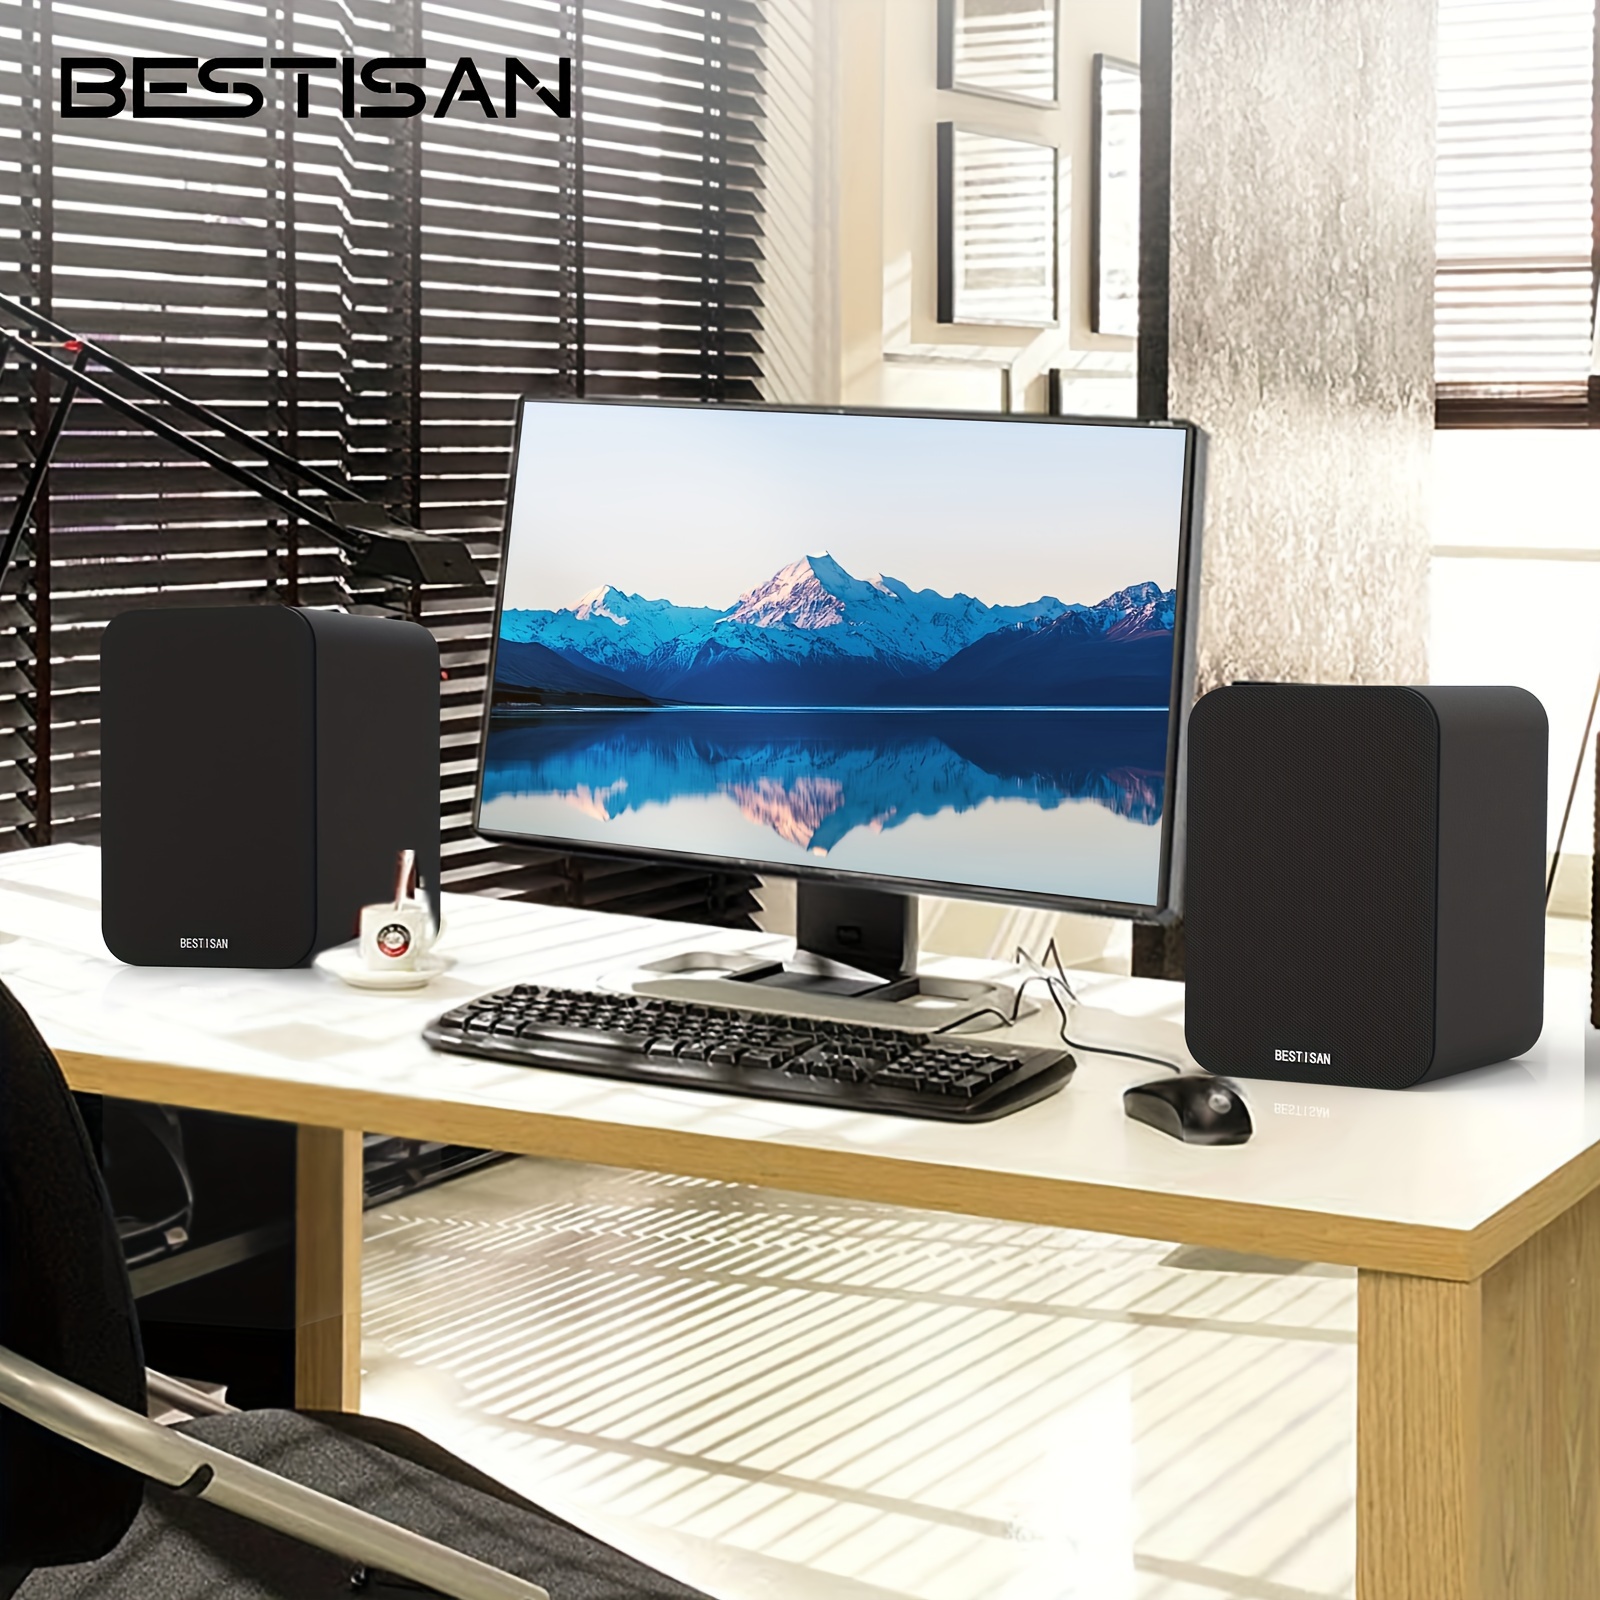 

Bestisan Sr04 Bt Bookshelf Speakers For Record Player, Powered Studio Speaker For Tv With Woofer, Horn Tweeter, And Optical/rca/coax Inputs